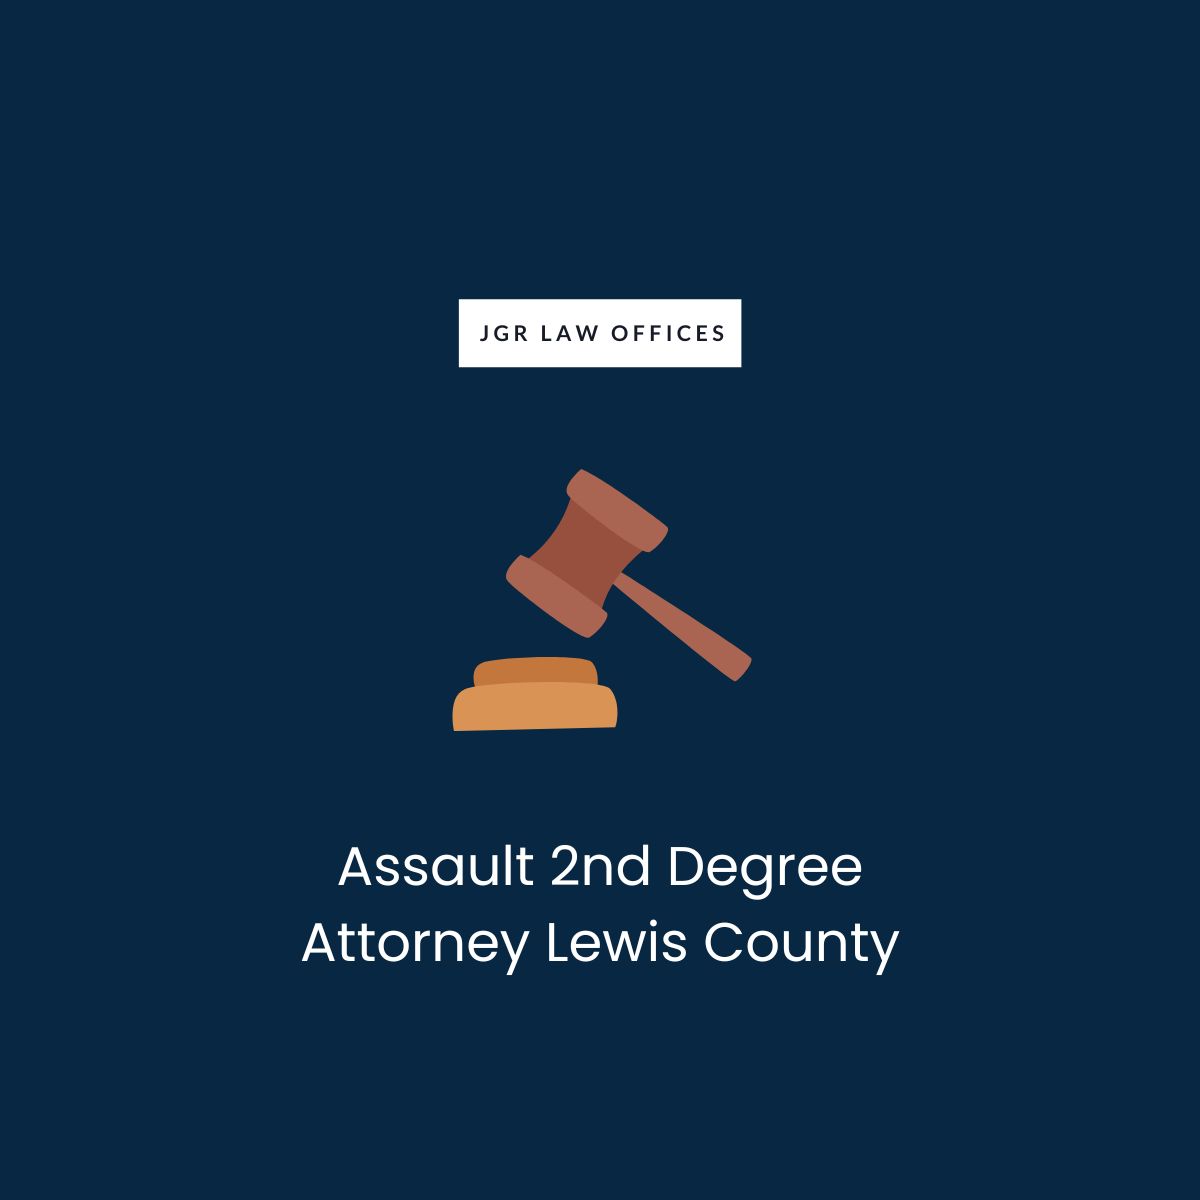 Assault 2nd Degree Attorney Lewis County